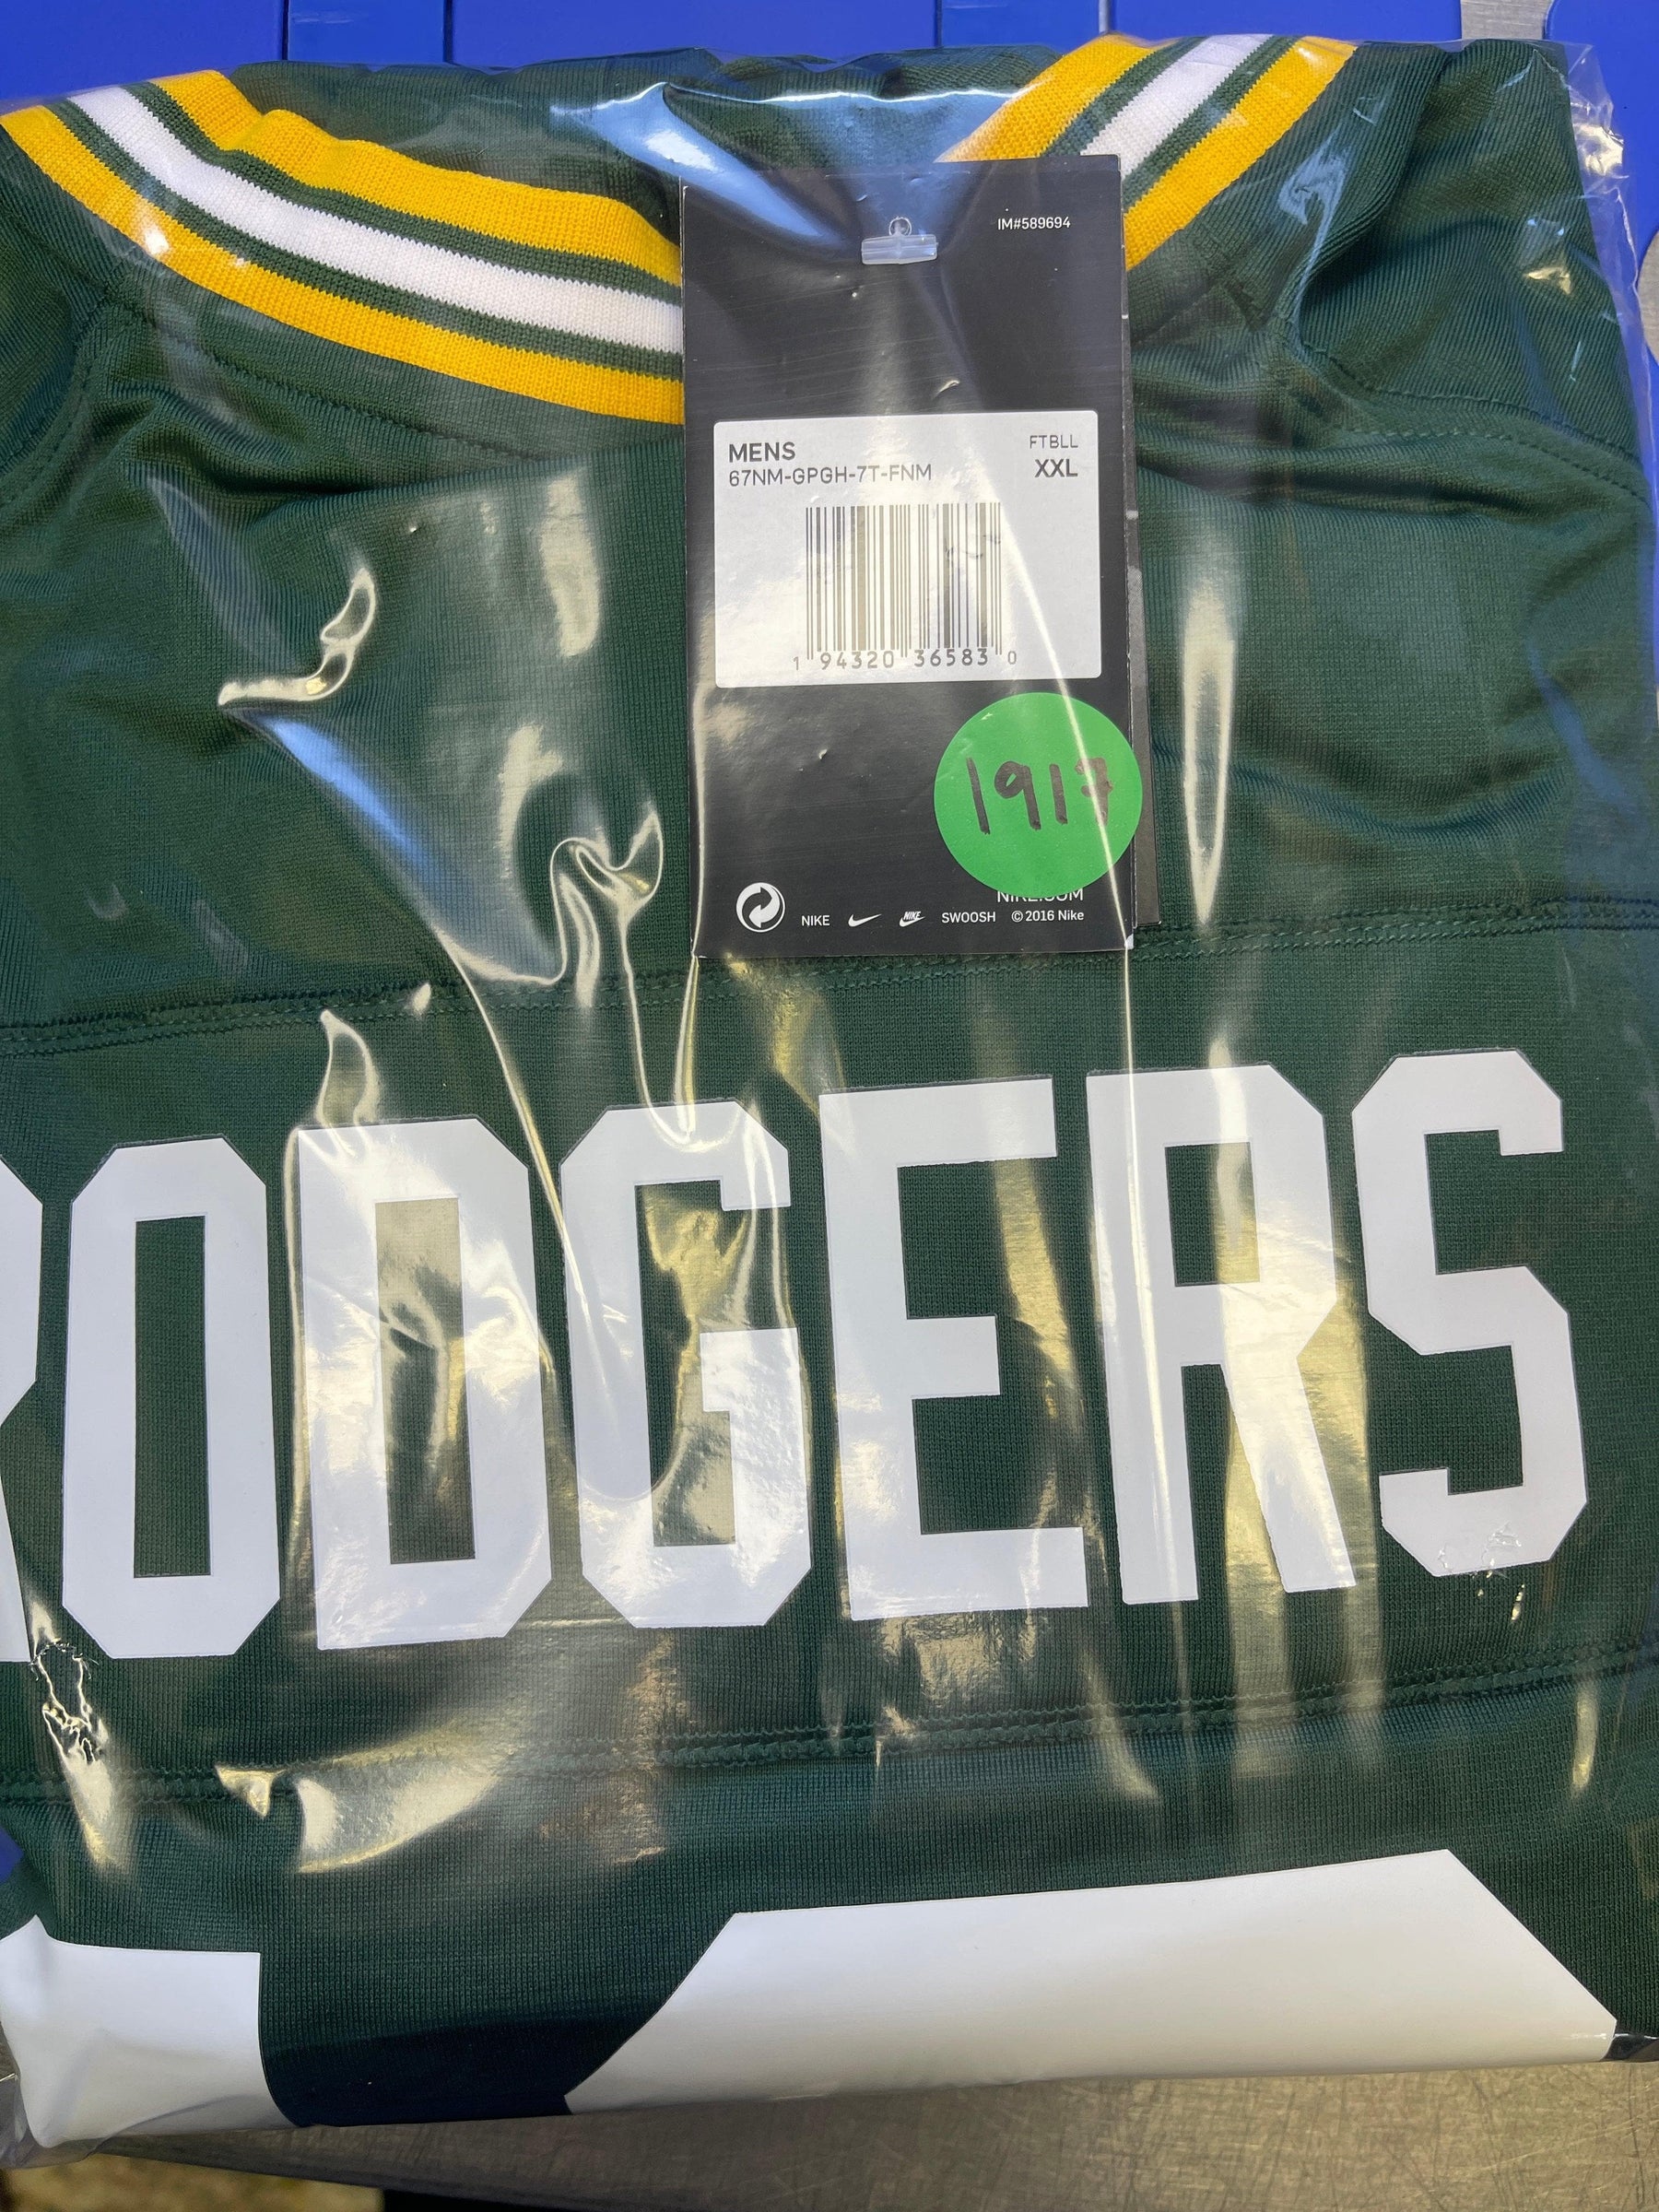 NFL Green Bay Packers Aaron Rodgers #12 Game Jersey Men's 2X-Large NWT